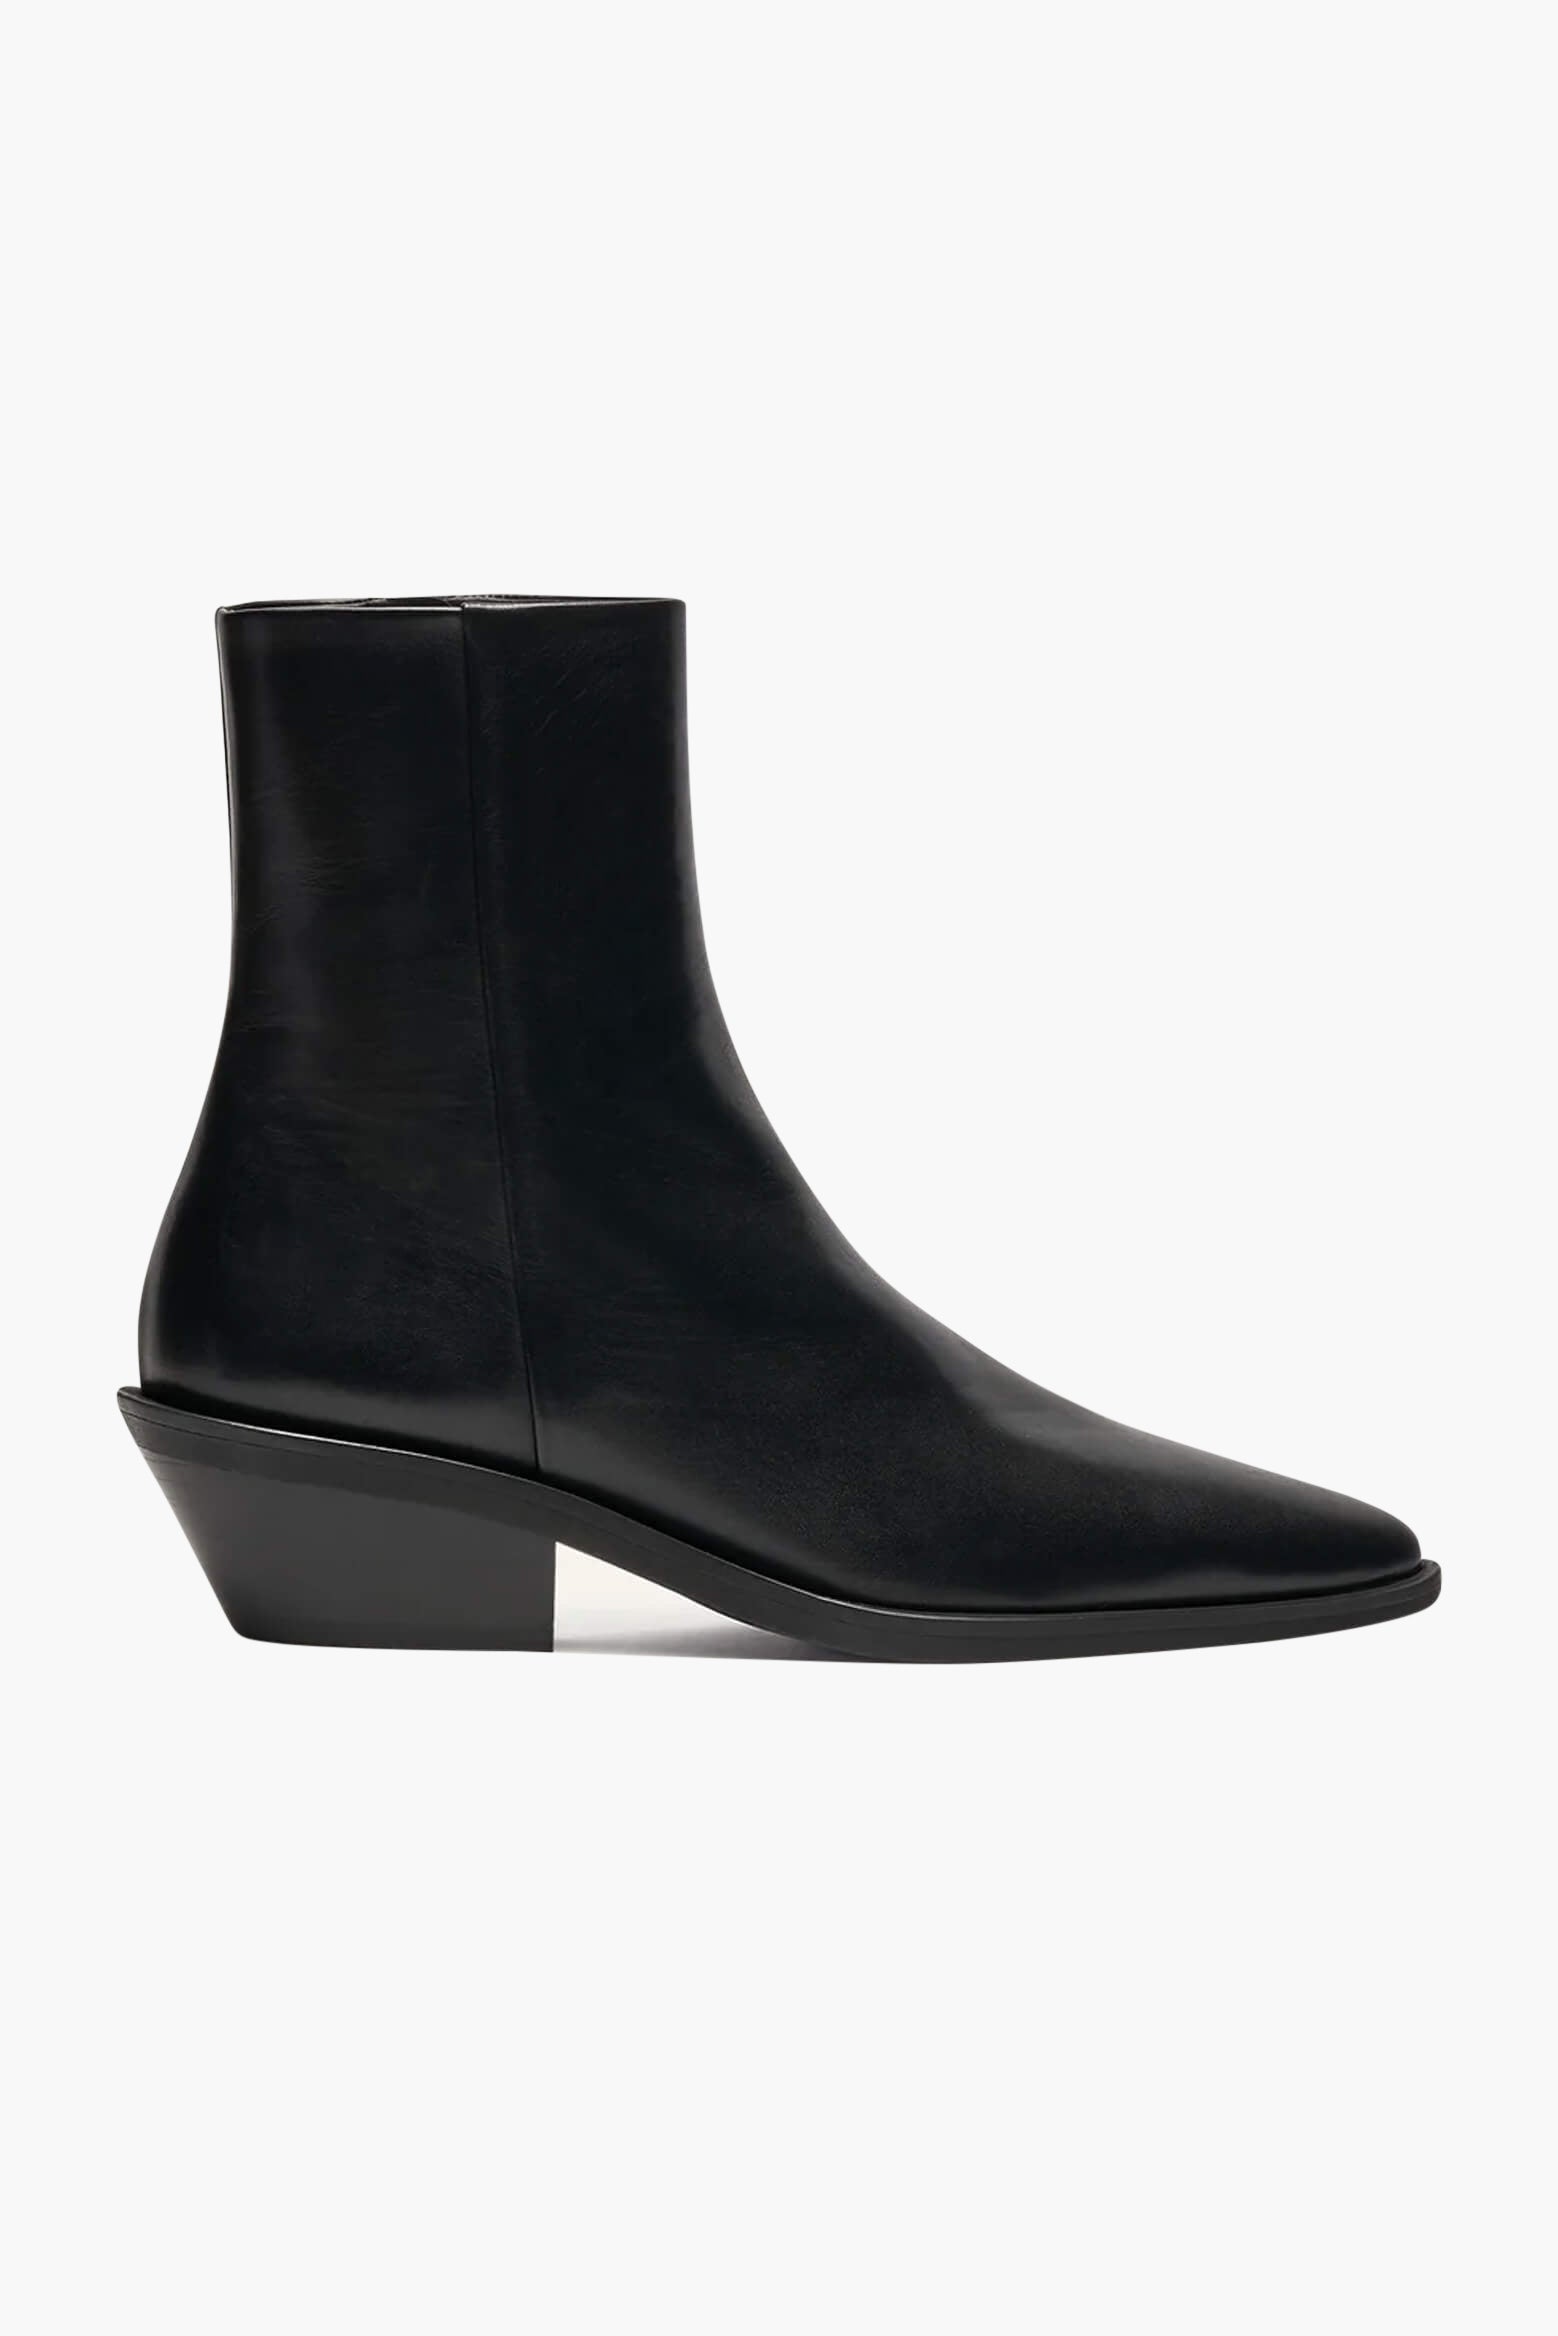 A.Emery Hudson Boot in Black from The New Trend 